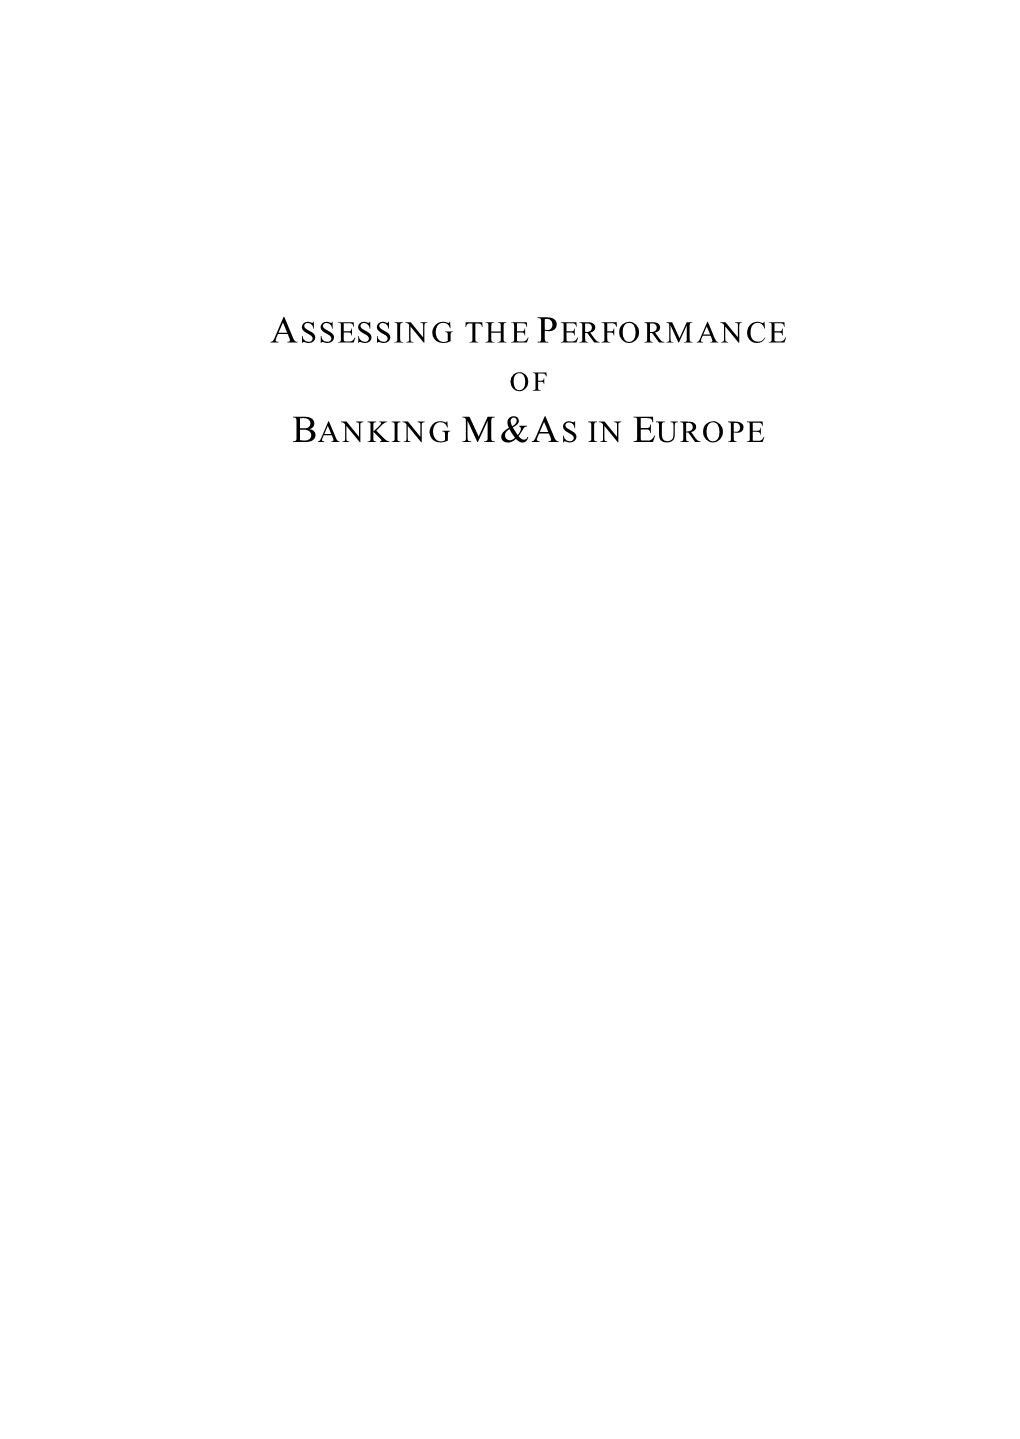 Assessing the Performance Banking M&As in Europe